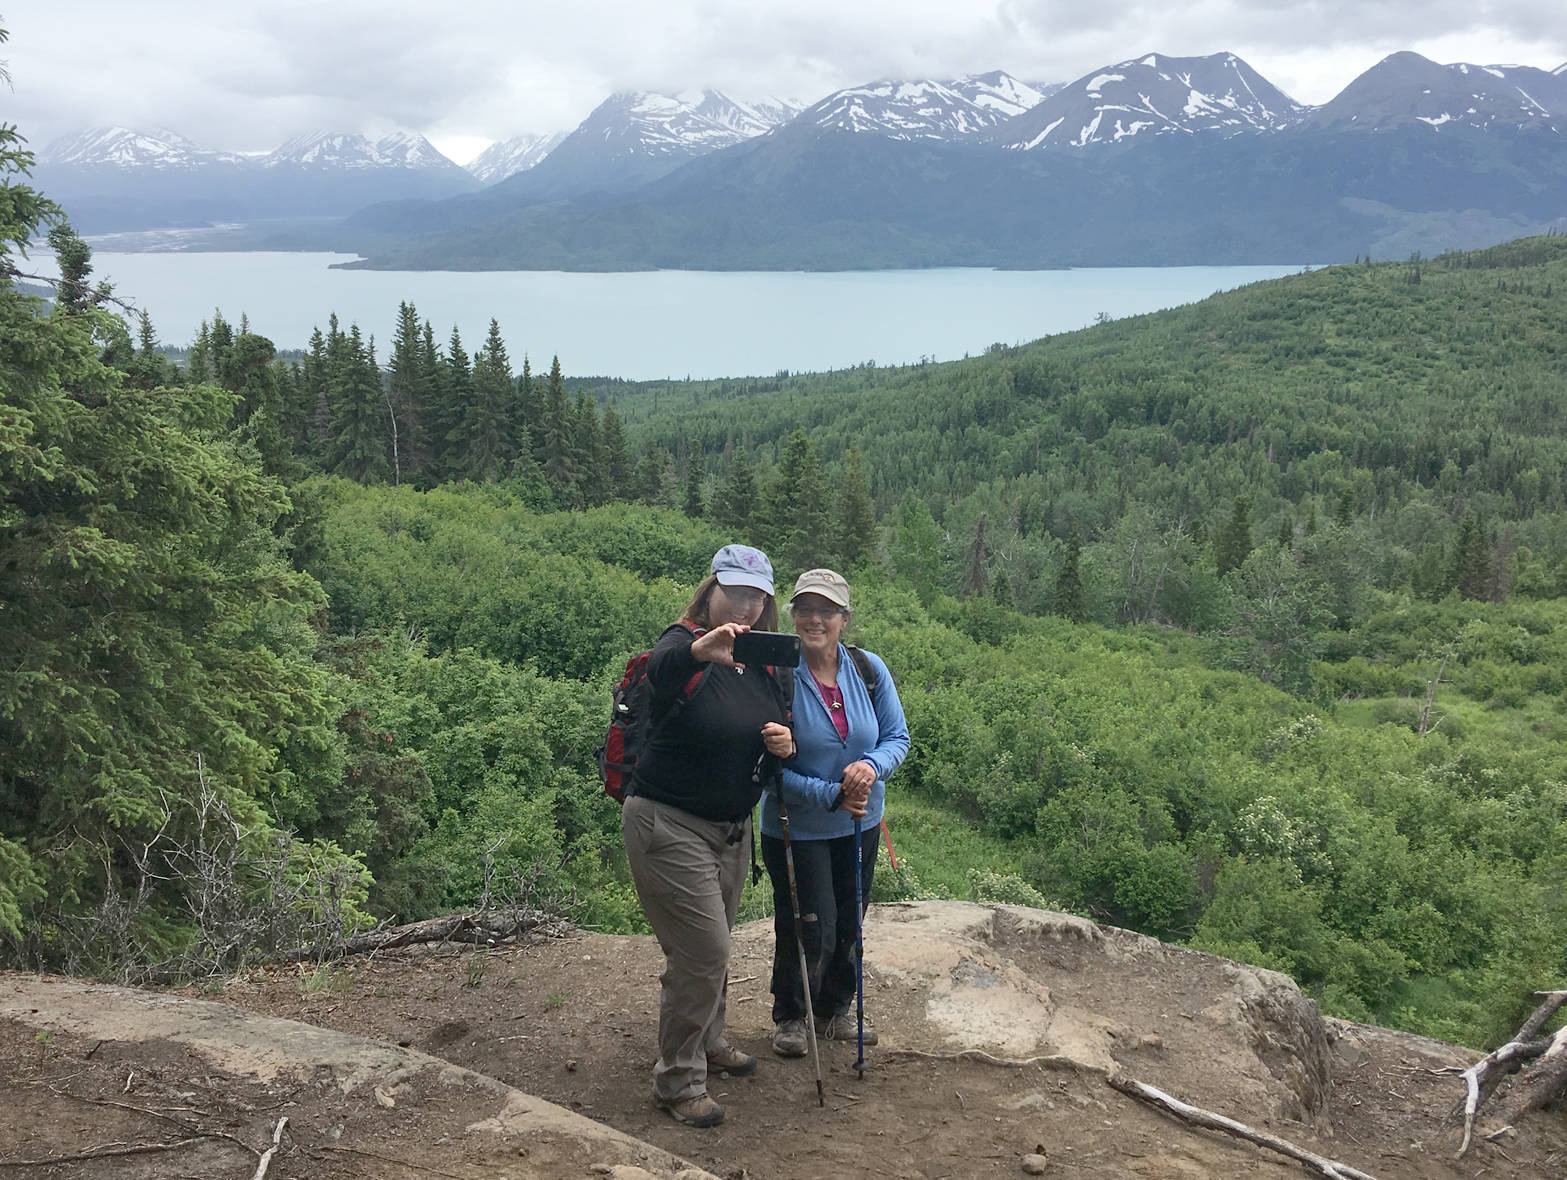 Sandy Kerns of Soldotna and Deborah Green of Moose Pass pause for a photograph during Take a Hike on the Bear Mountain trail Friday, June 29, 2018. Skilak Lake is in the background. (Photo by Jeff Helminiak/Peninsula Clarion)